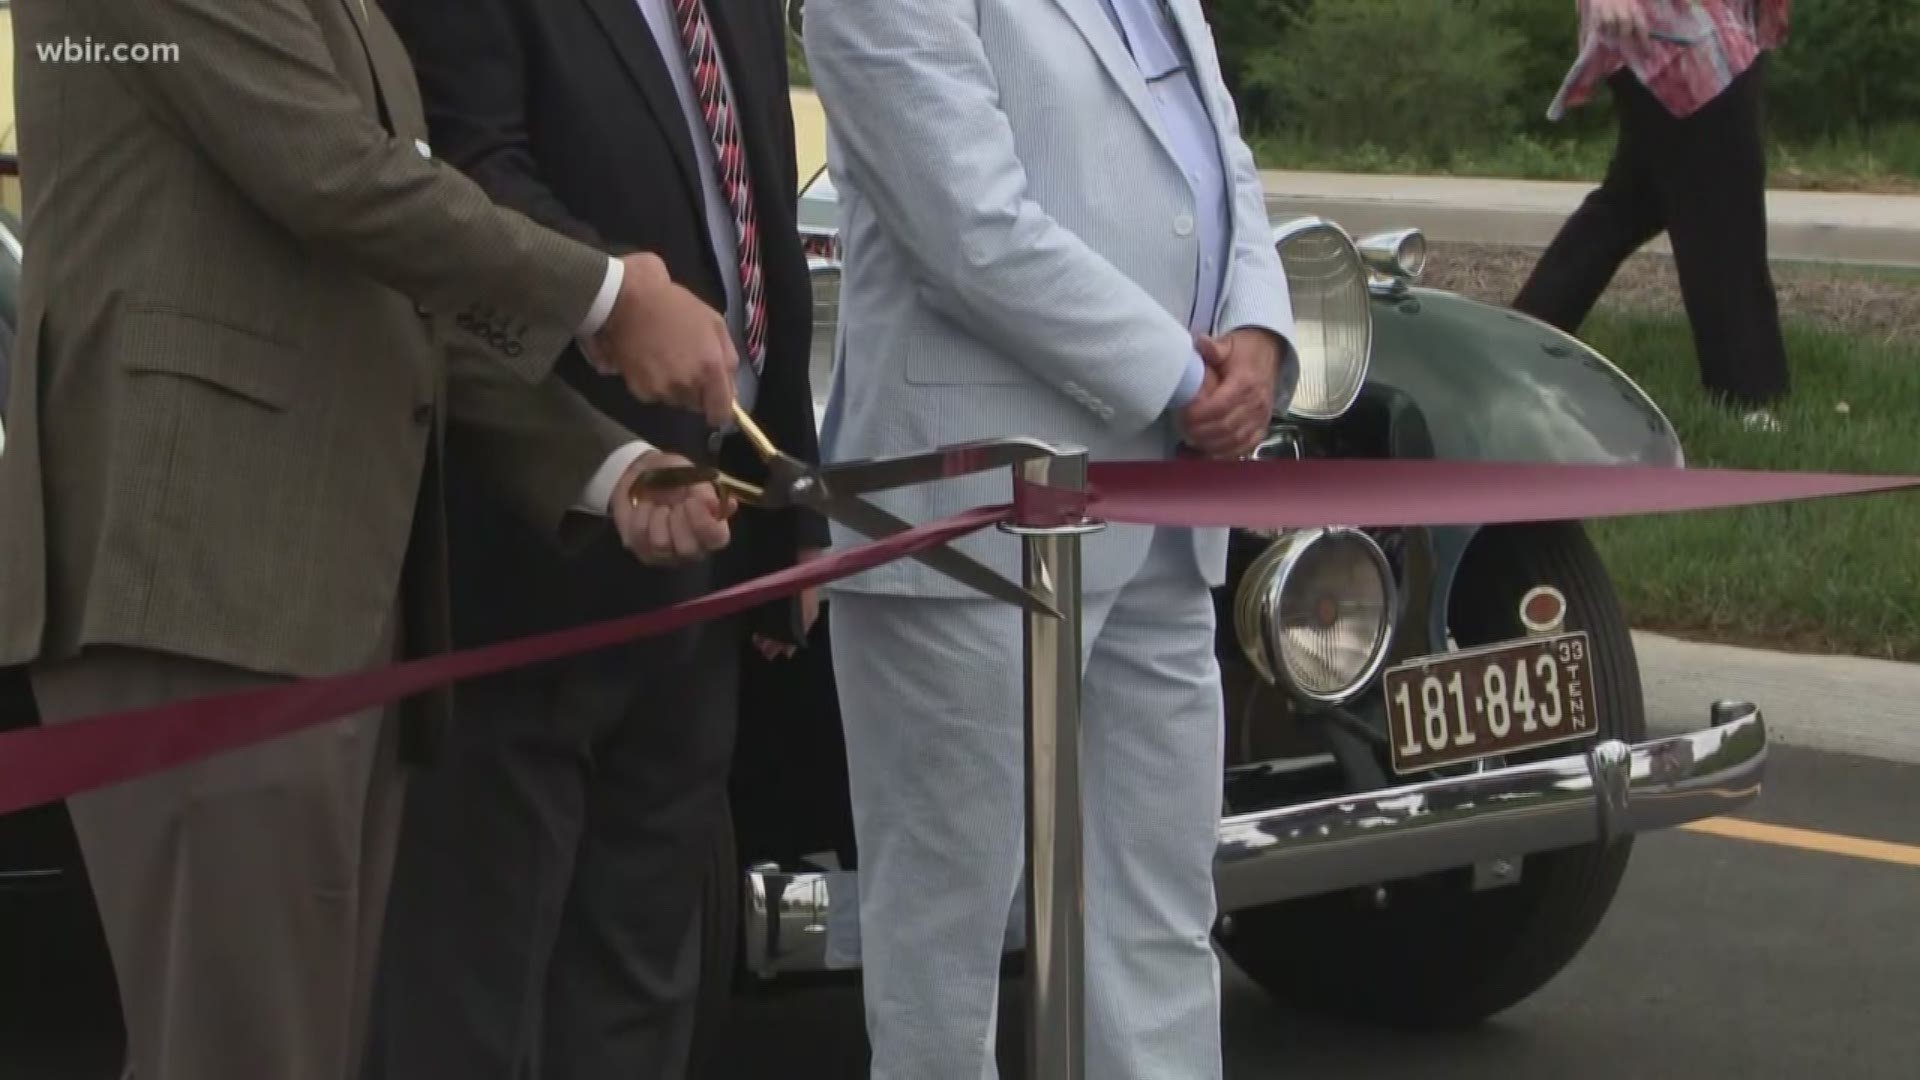 The City of Alcoa cut the ribbon on Tesla Boulevard, which will one day be a large new development in the city.